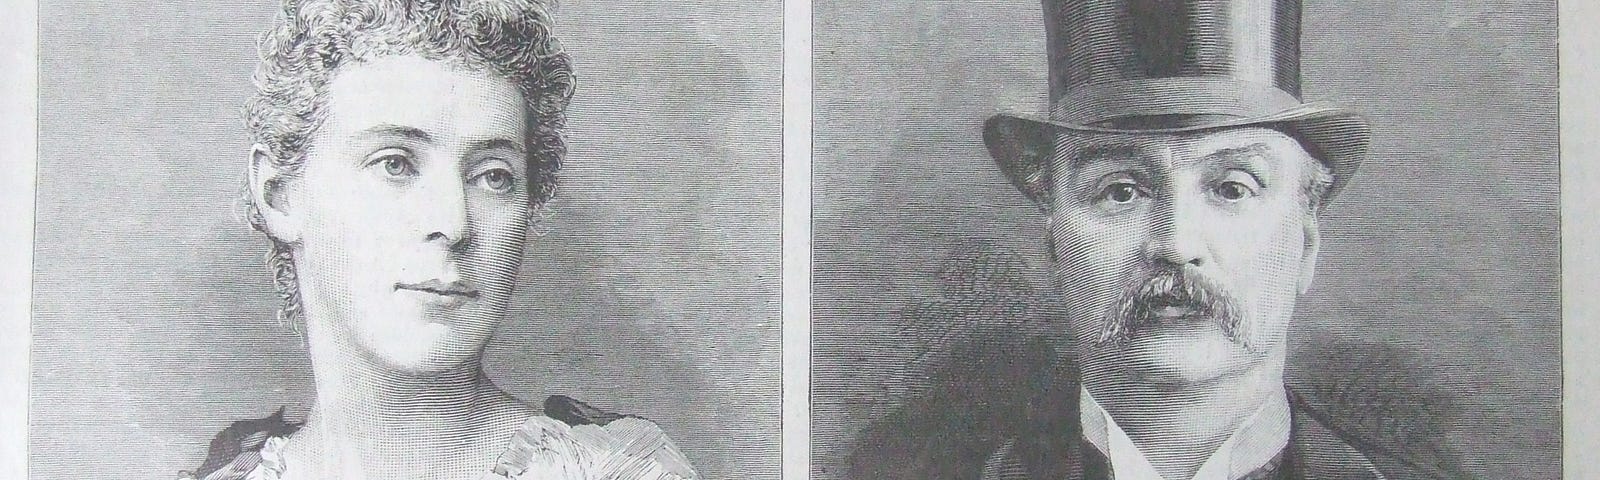 Florence and Jame Maybrick both may have been killers